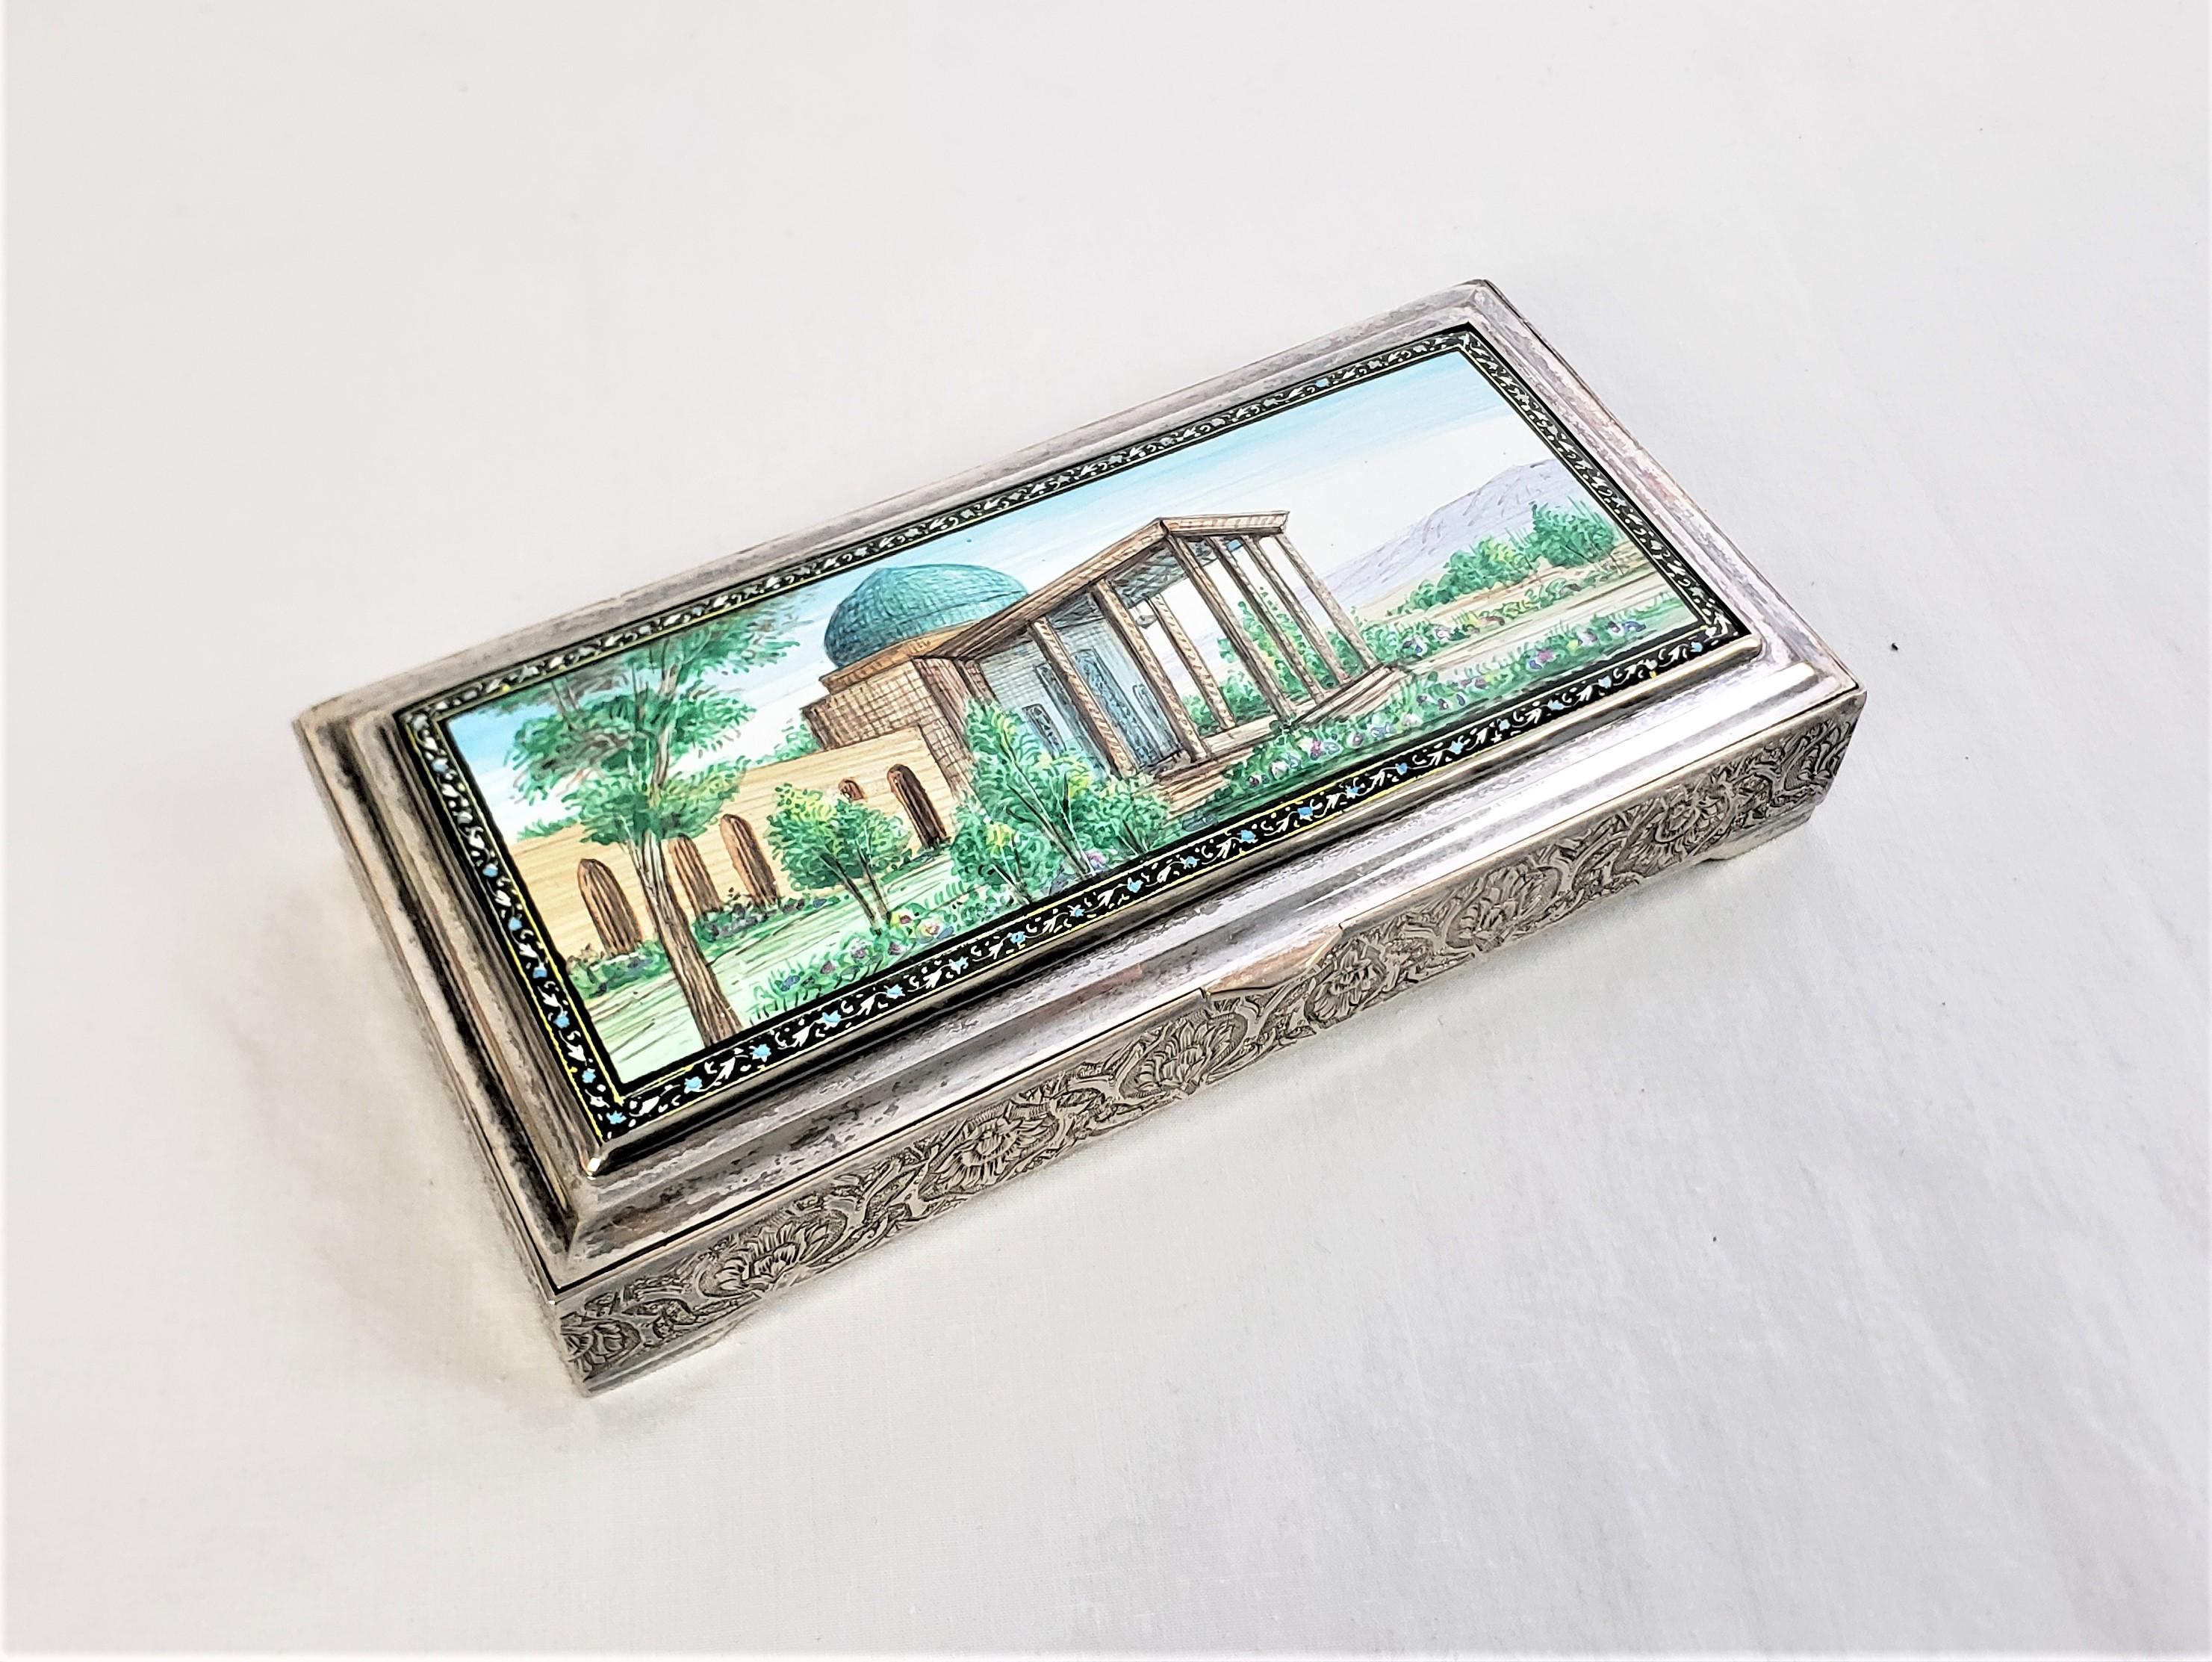 This antique box is signed by an unknown maker, but presumed to have originated from the UAE and date to approximately 1920 and done in the period Bessarabian style. The box is composed of sterling silver and has a hand-painted enamel top with an